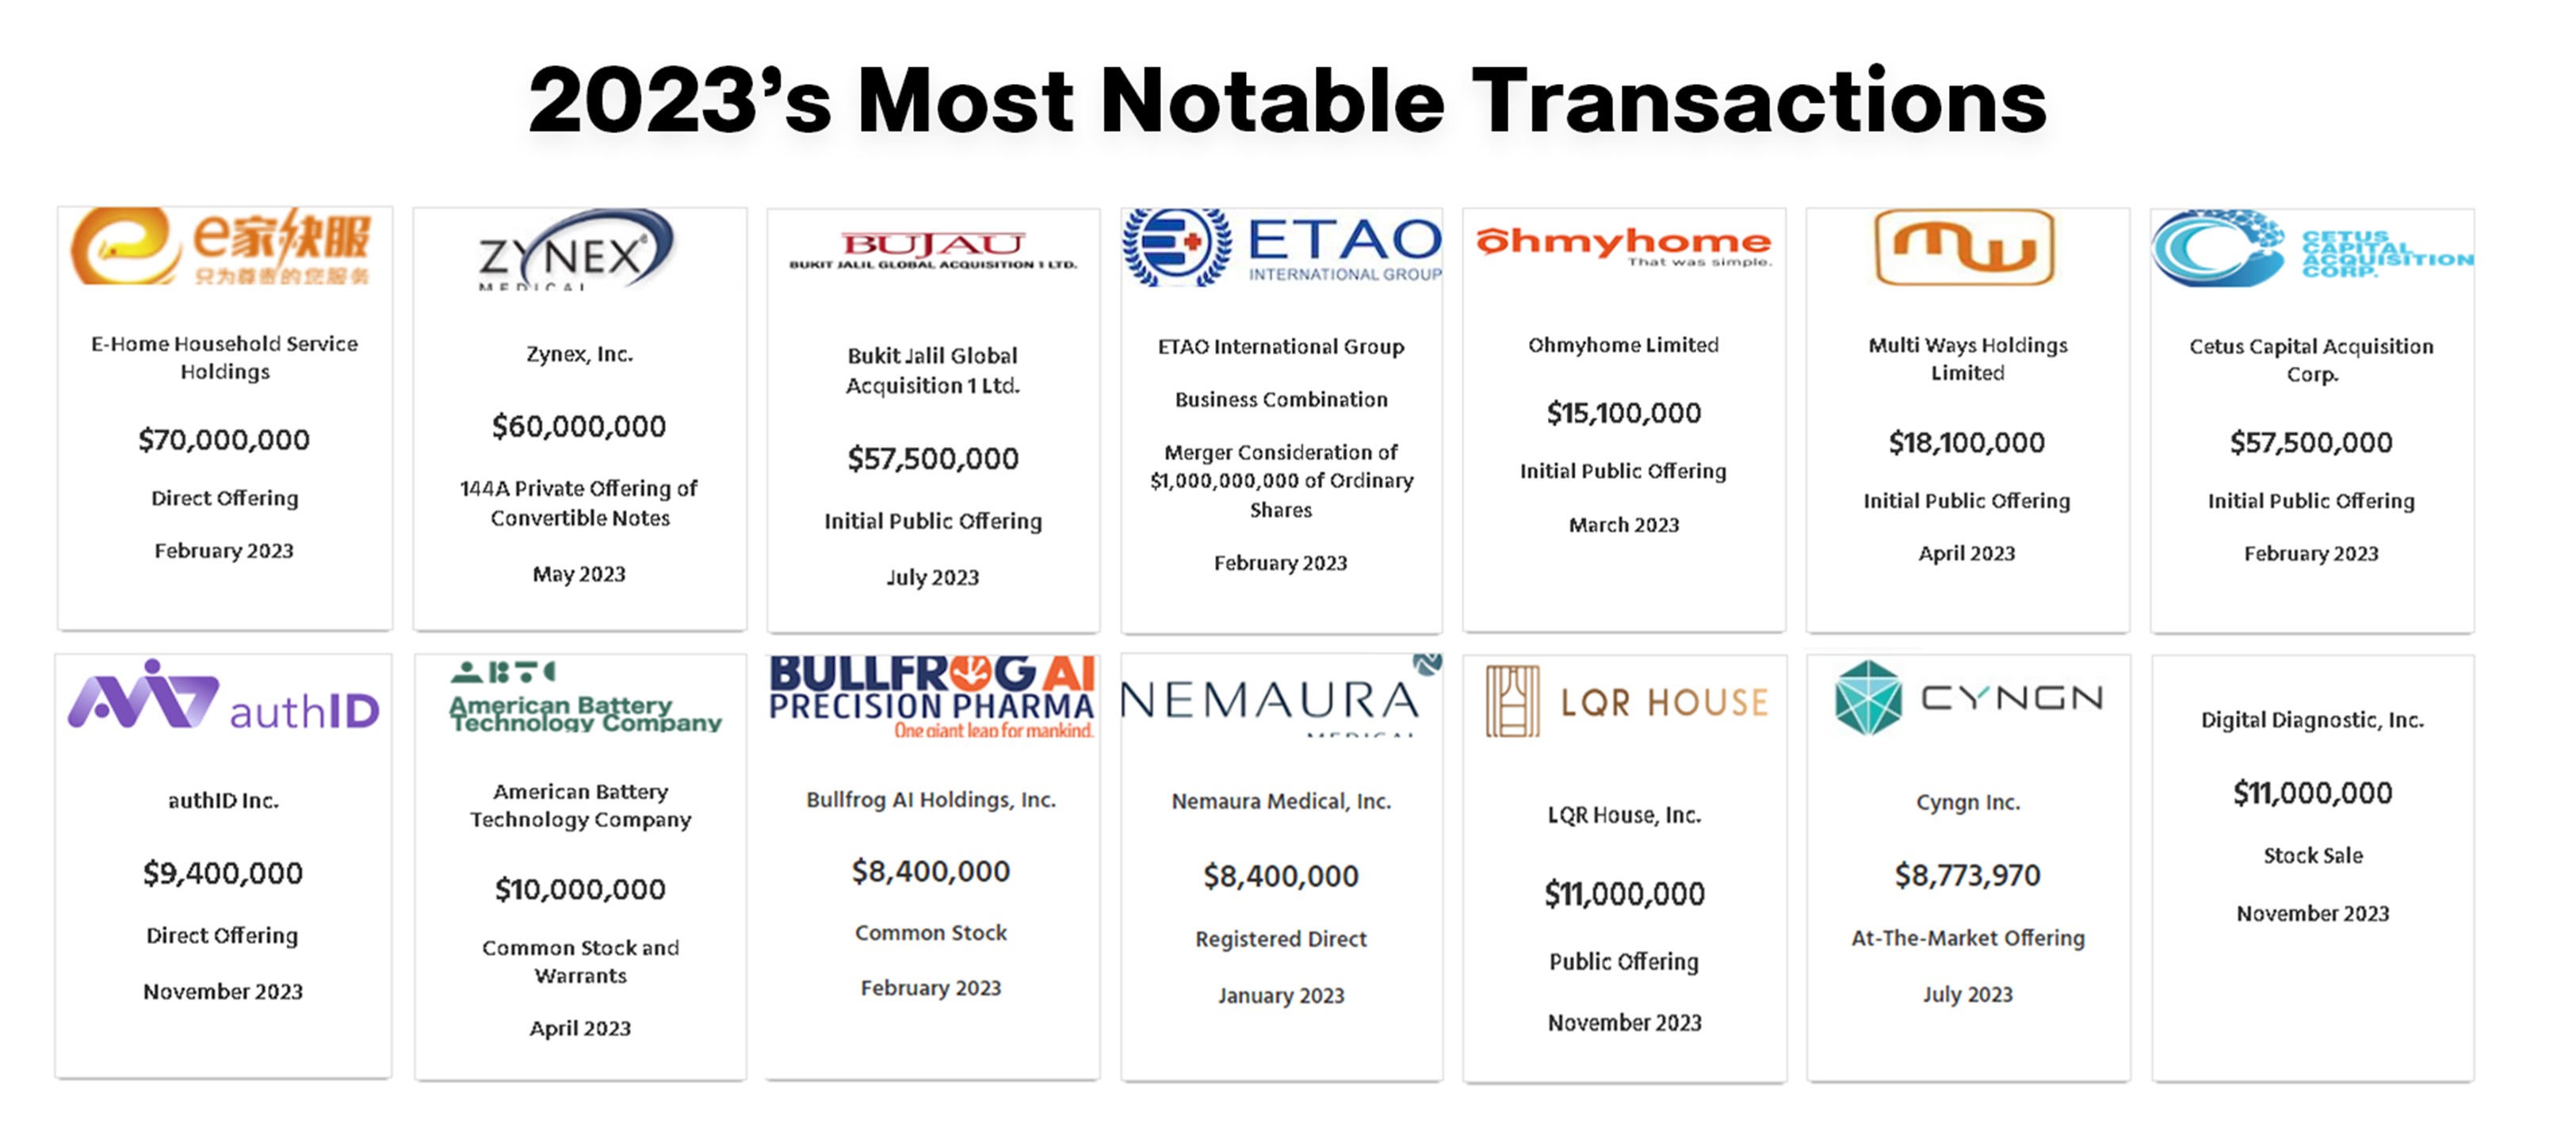 SRFC's Most Notable Transactions throughout 2023